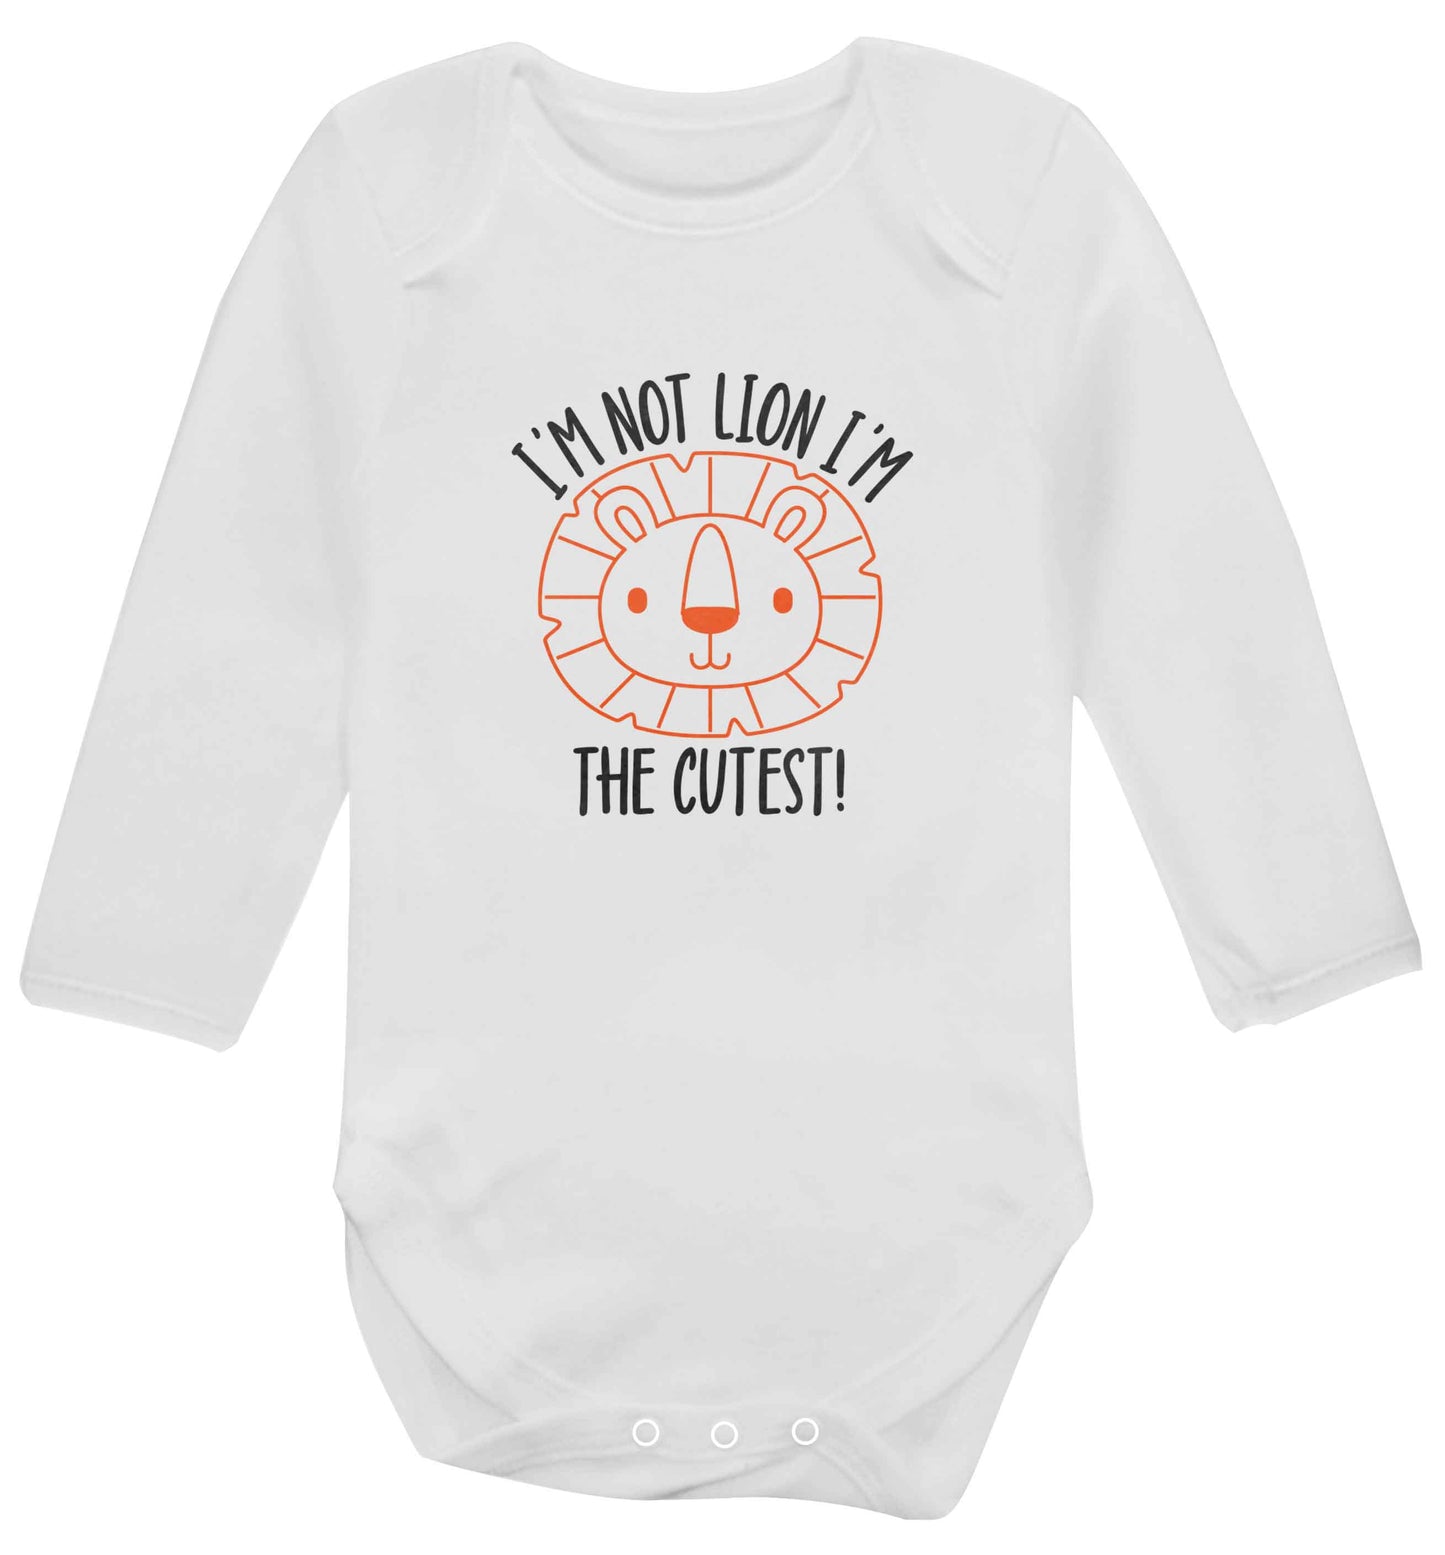 I'm not lion I'm the cutest baby vest long sleeved white 6-12 months